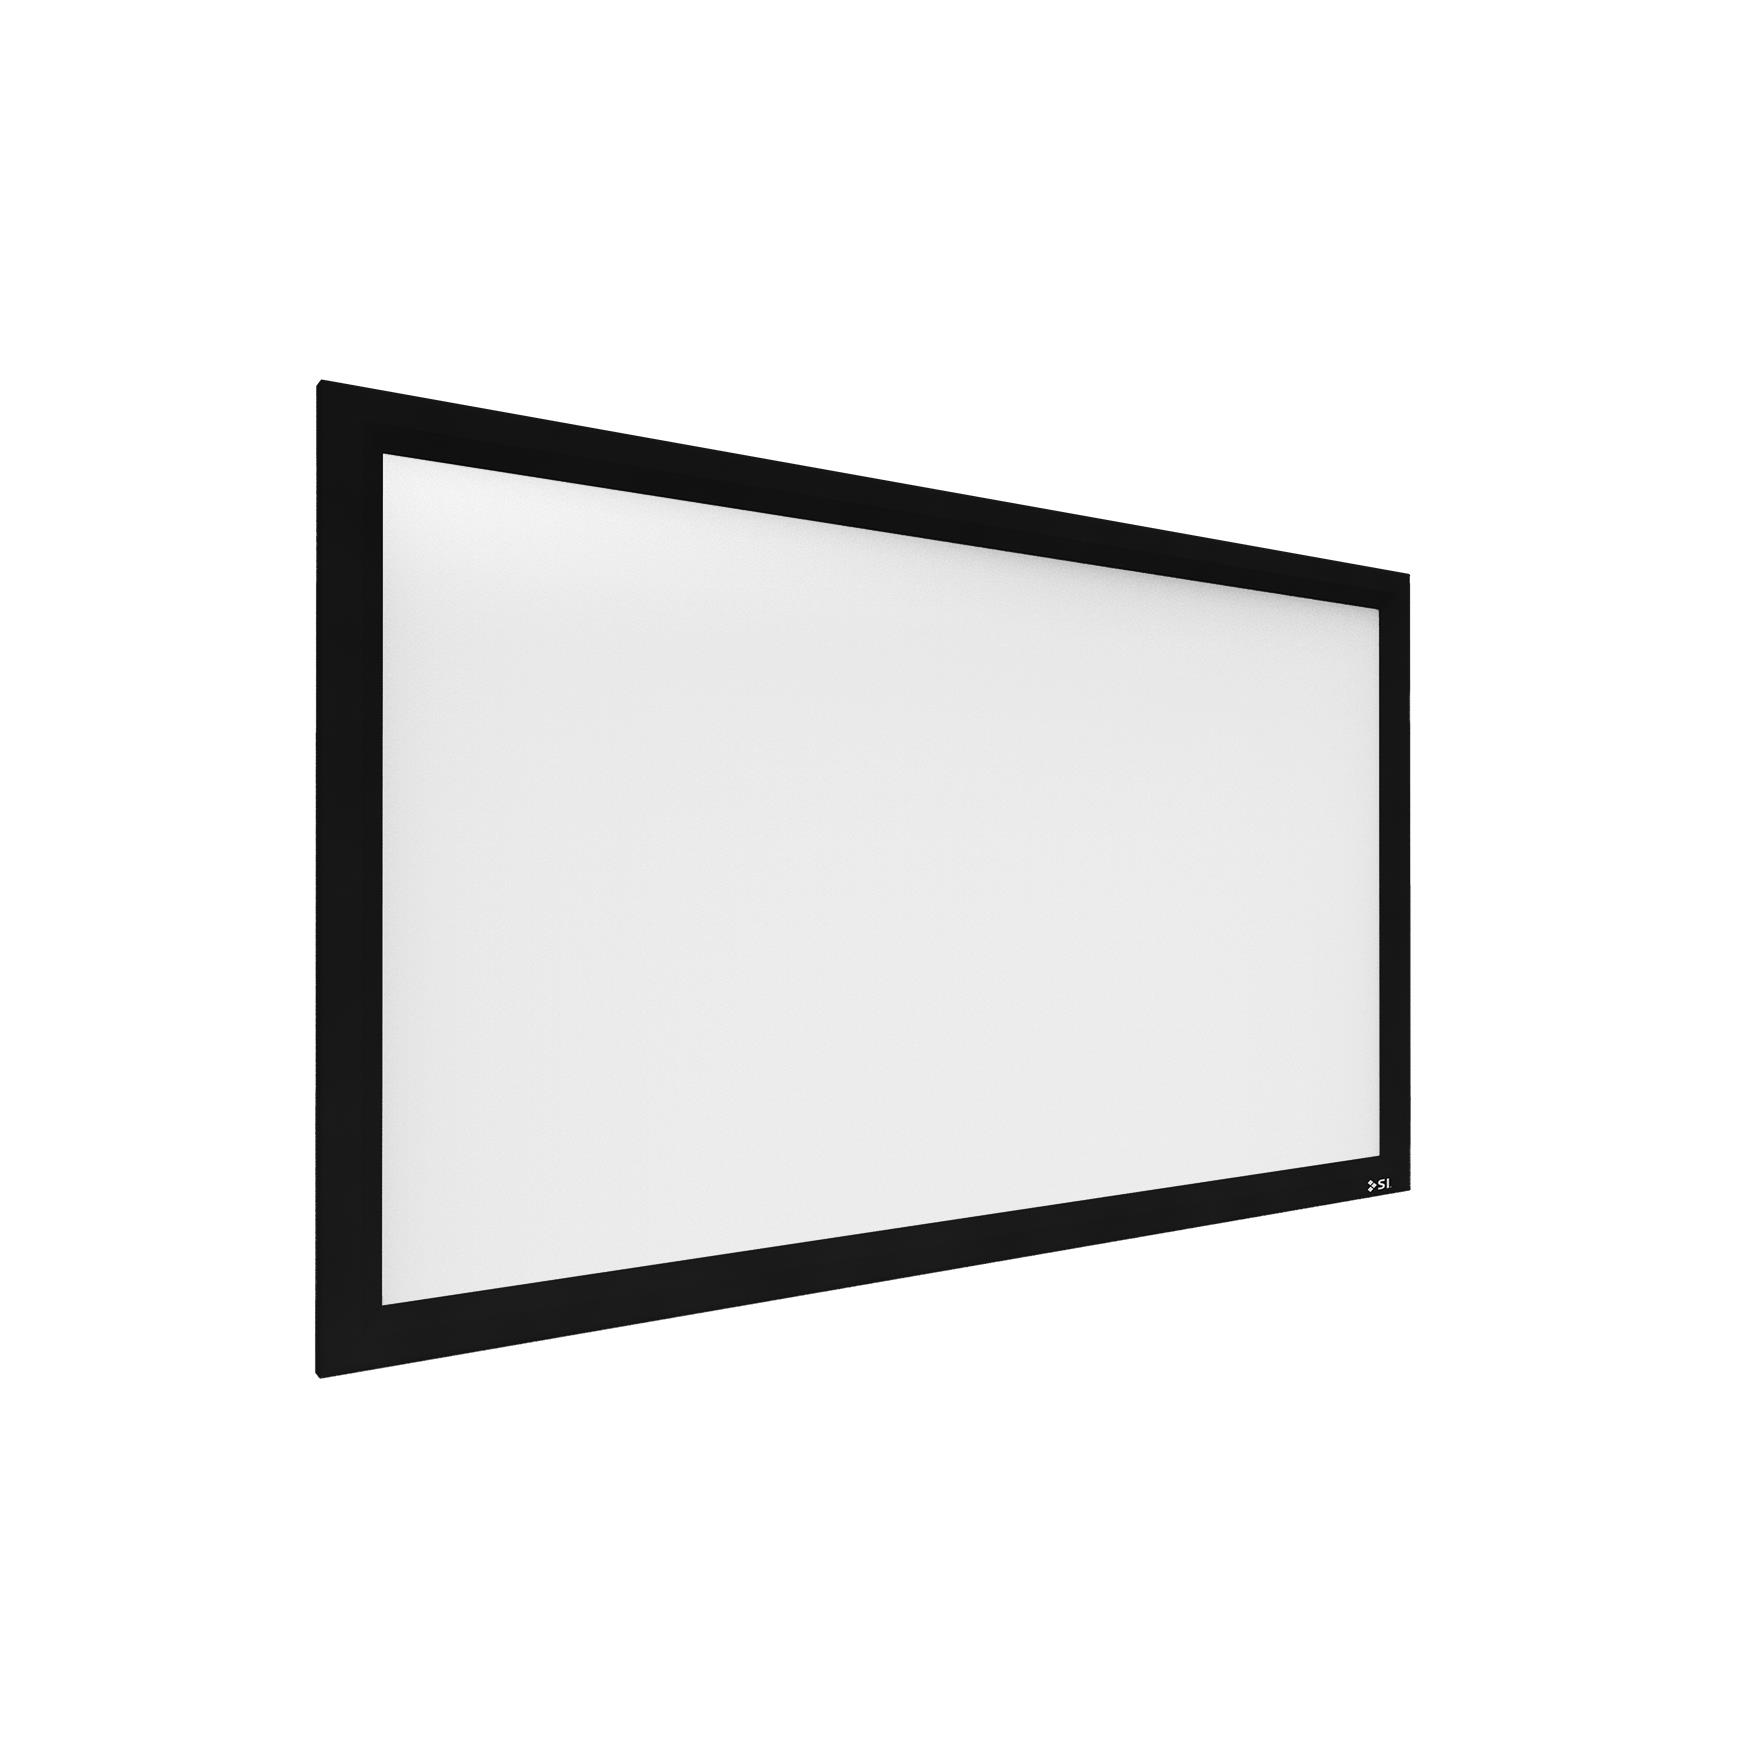 Screen Innovations 3 Series Fixed - 205